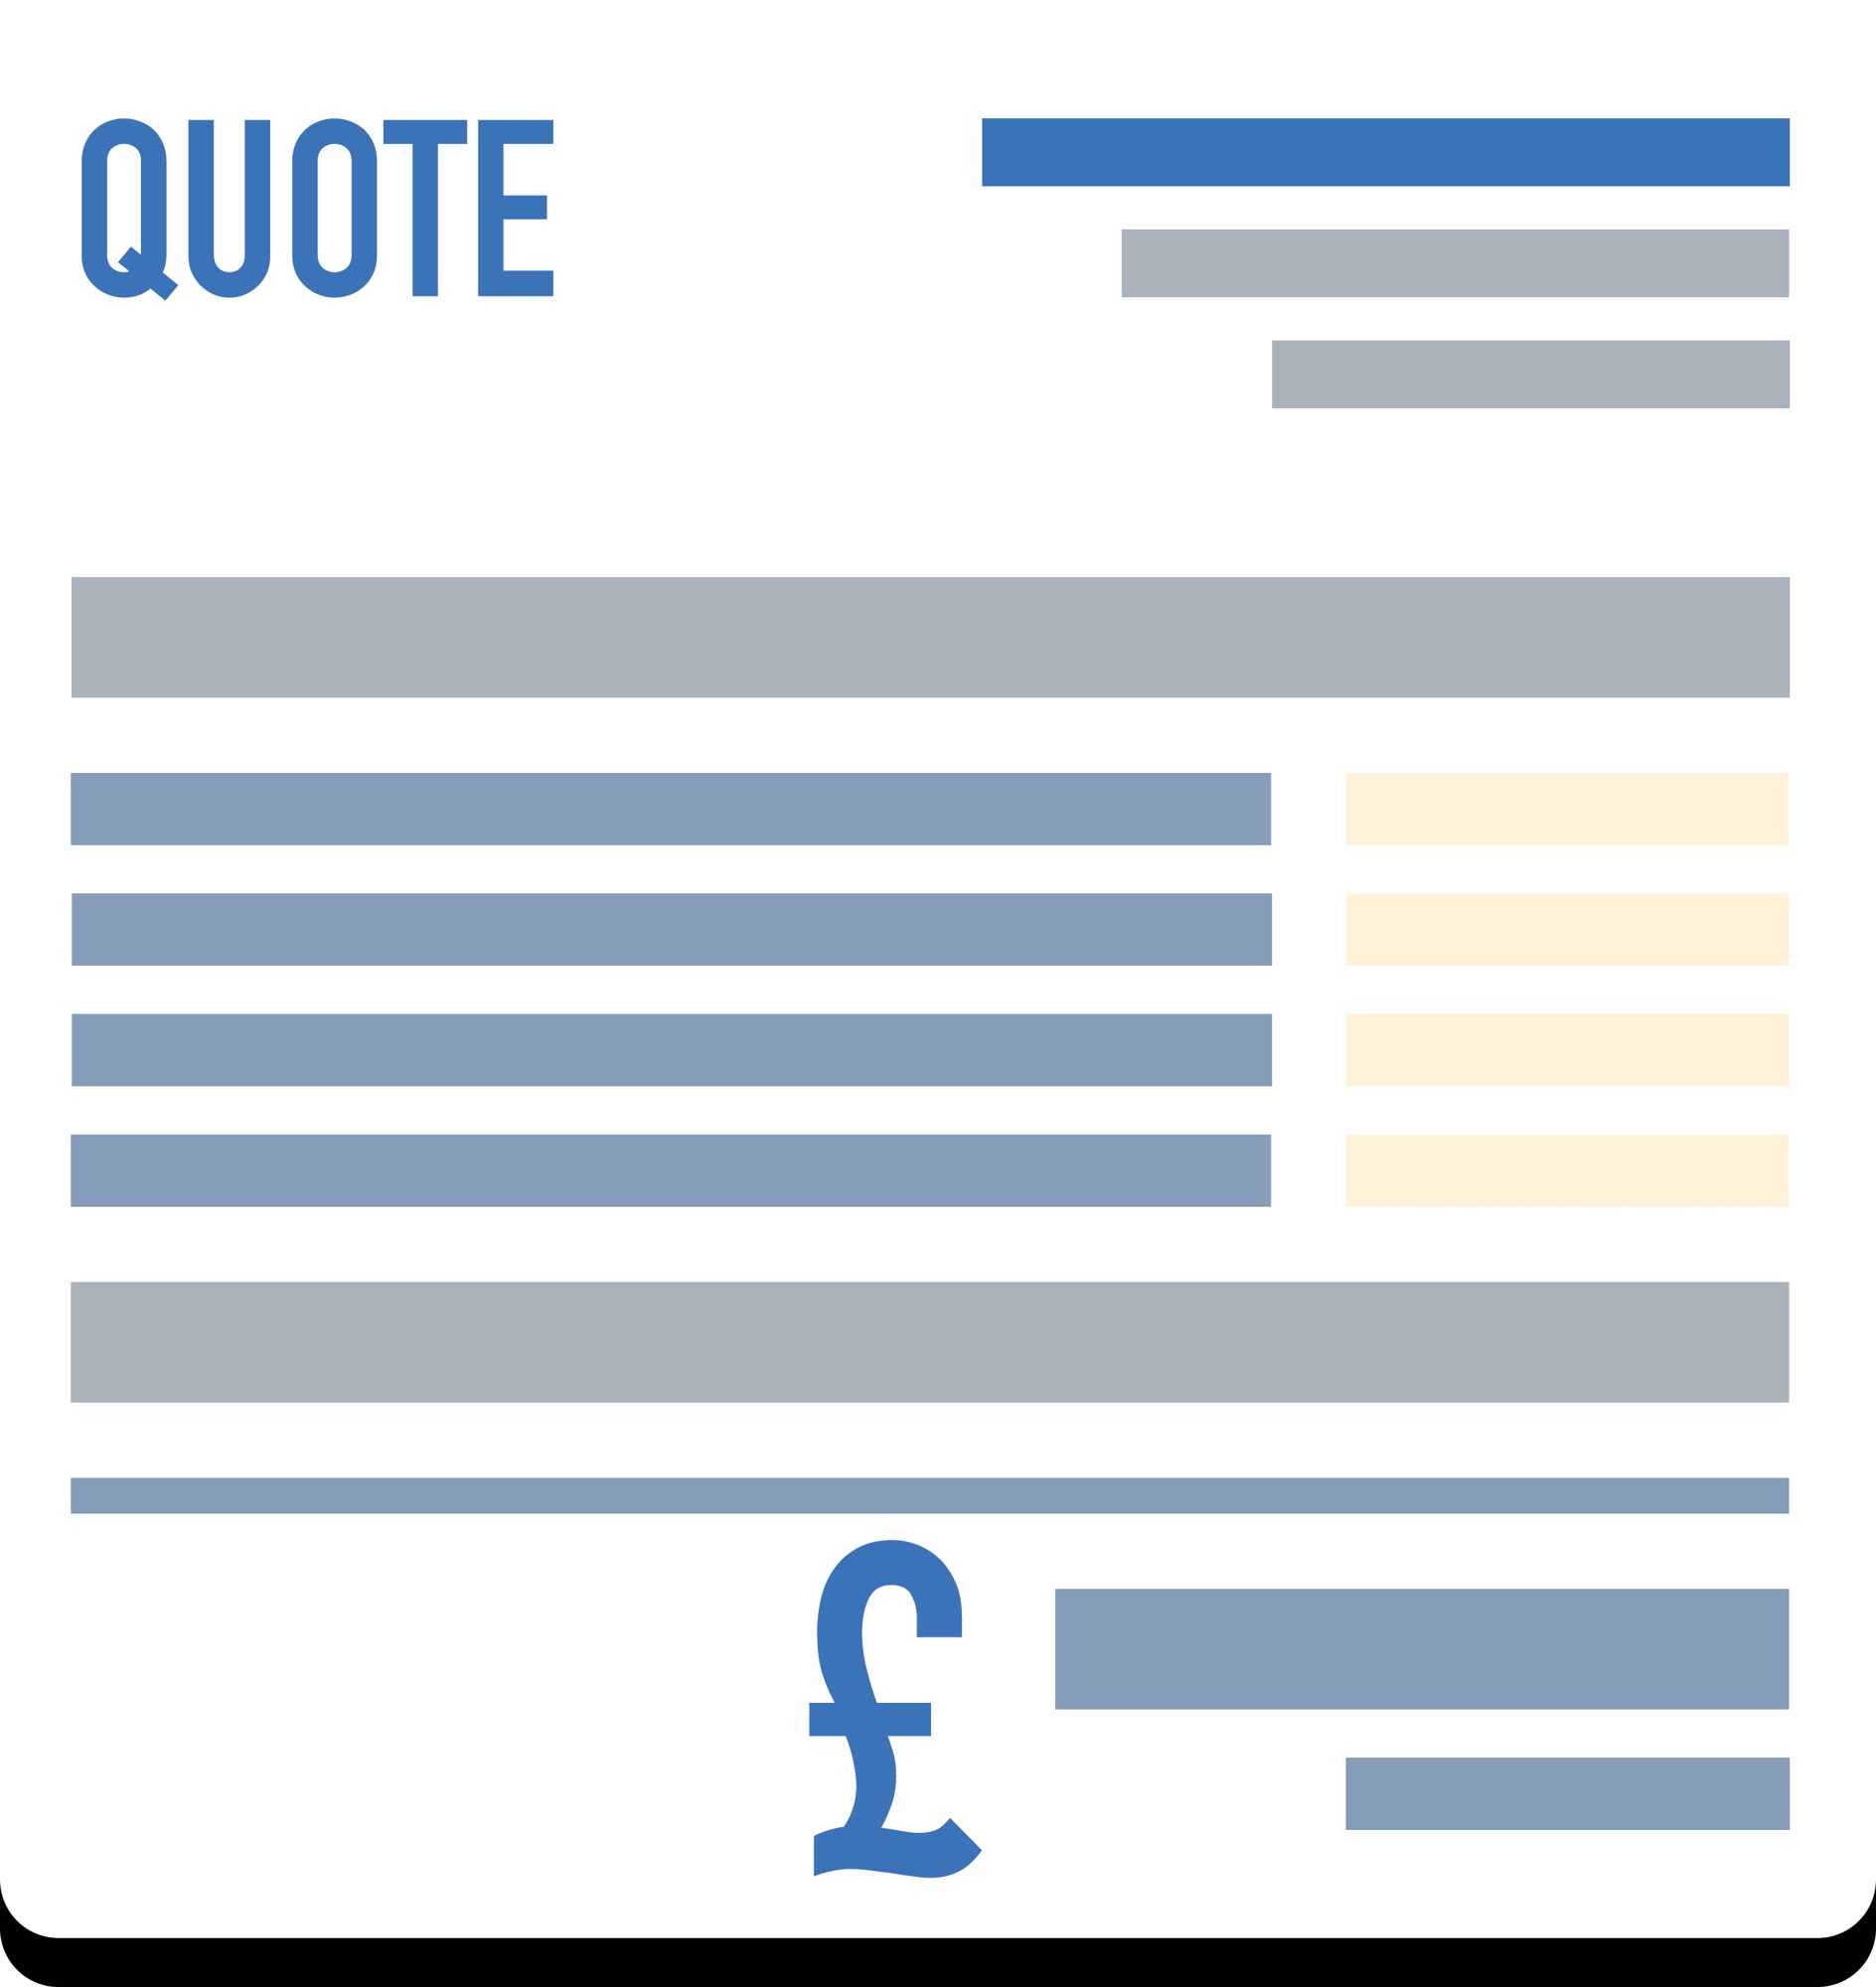 Quote template for window glazing company